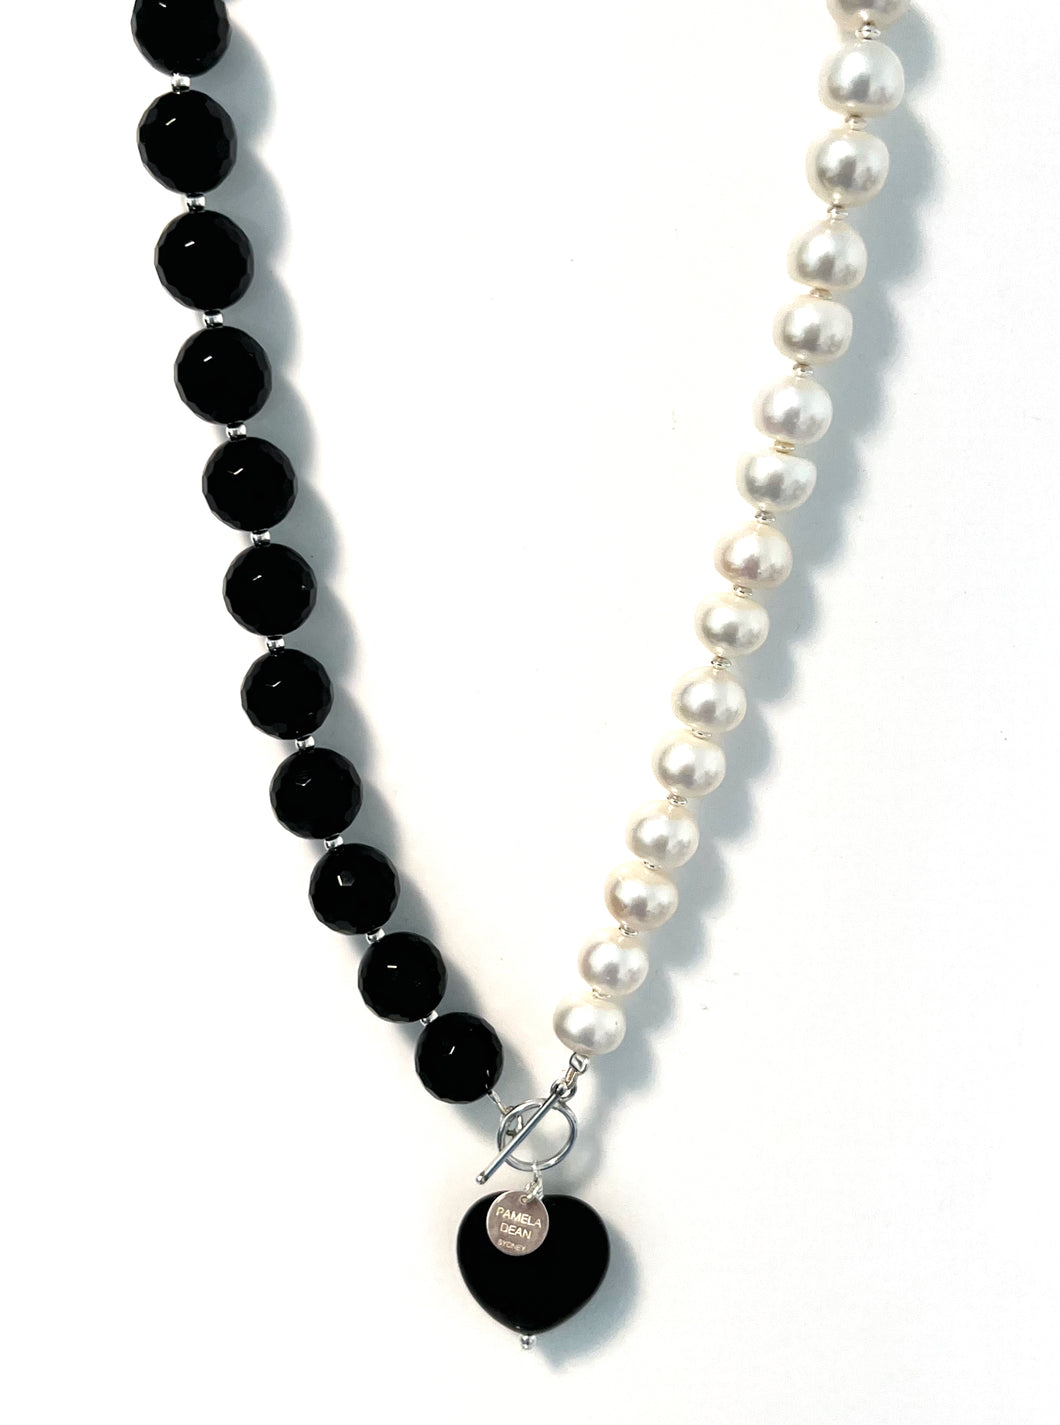 Australian Handmade Black Necklace with Onyx Pearls and Sterling Silver